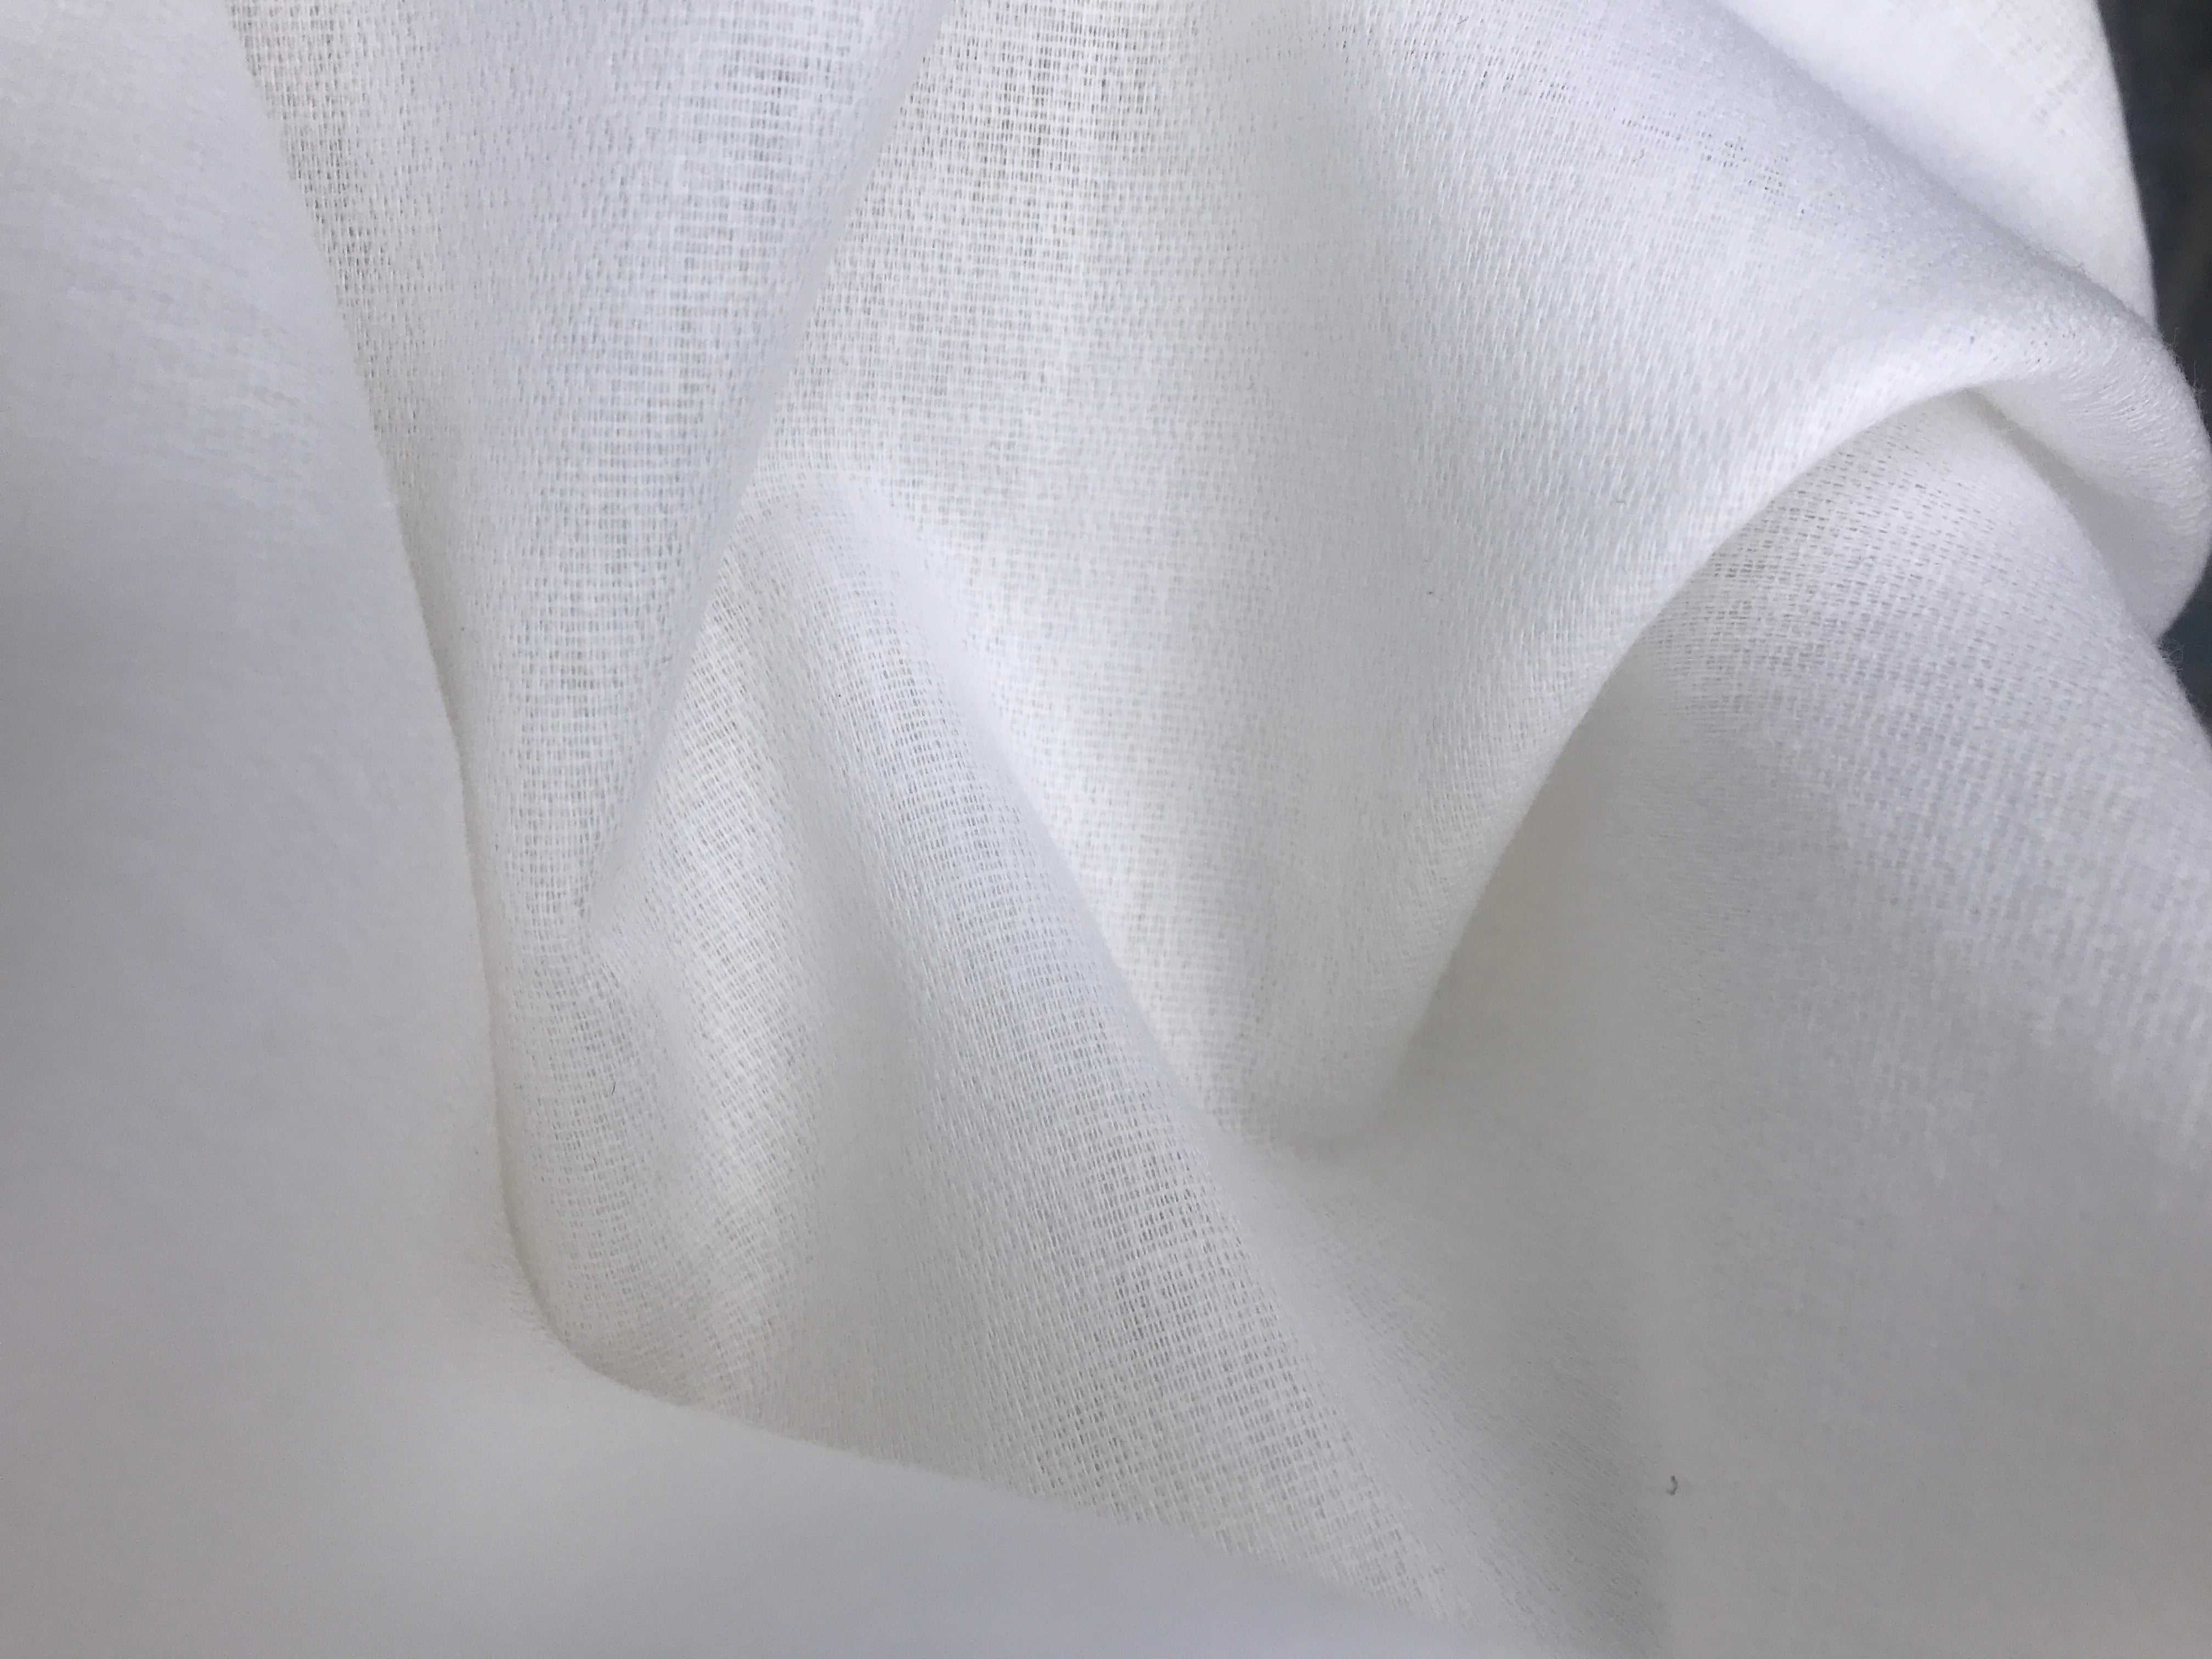 Cotton Wool Mix Interlining with polyamide adhesive for soft handfeel. 105g and 150cm wide